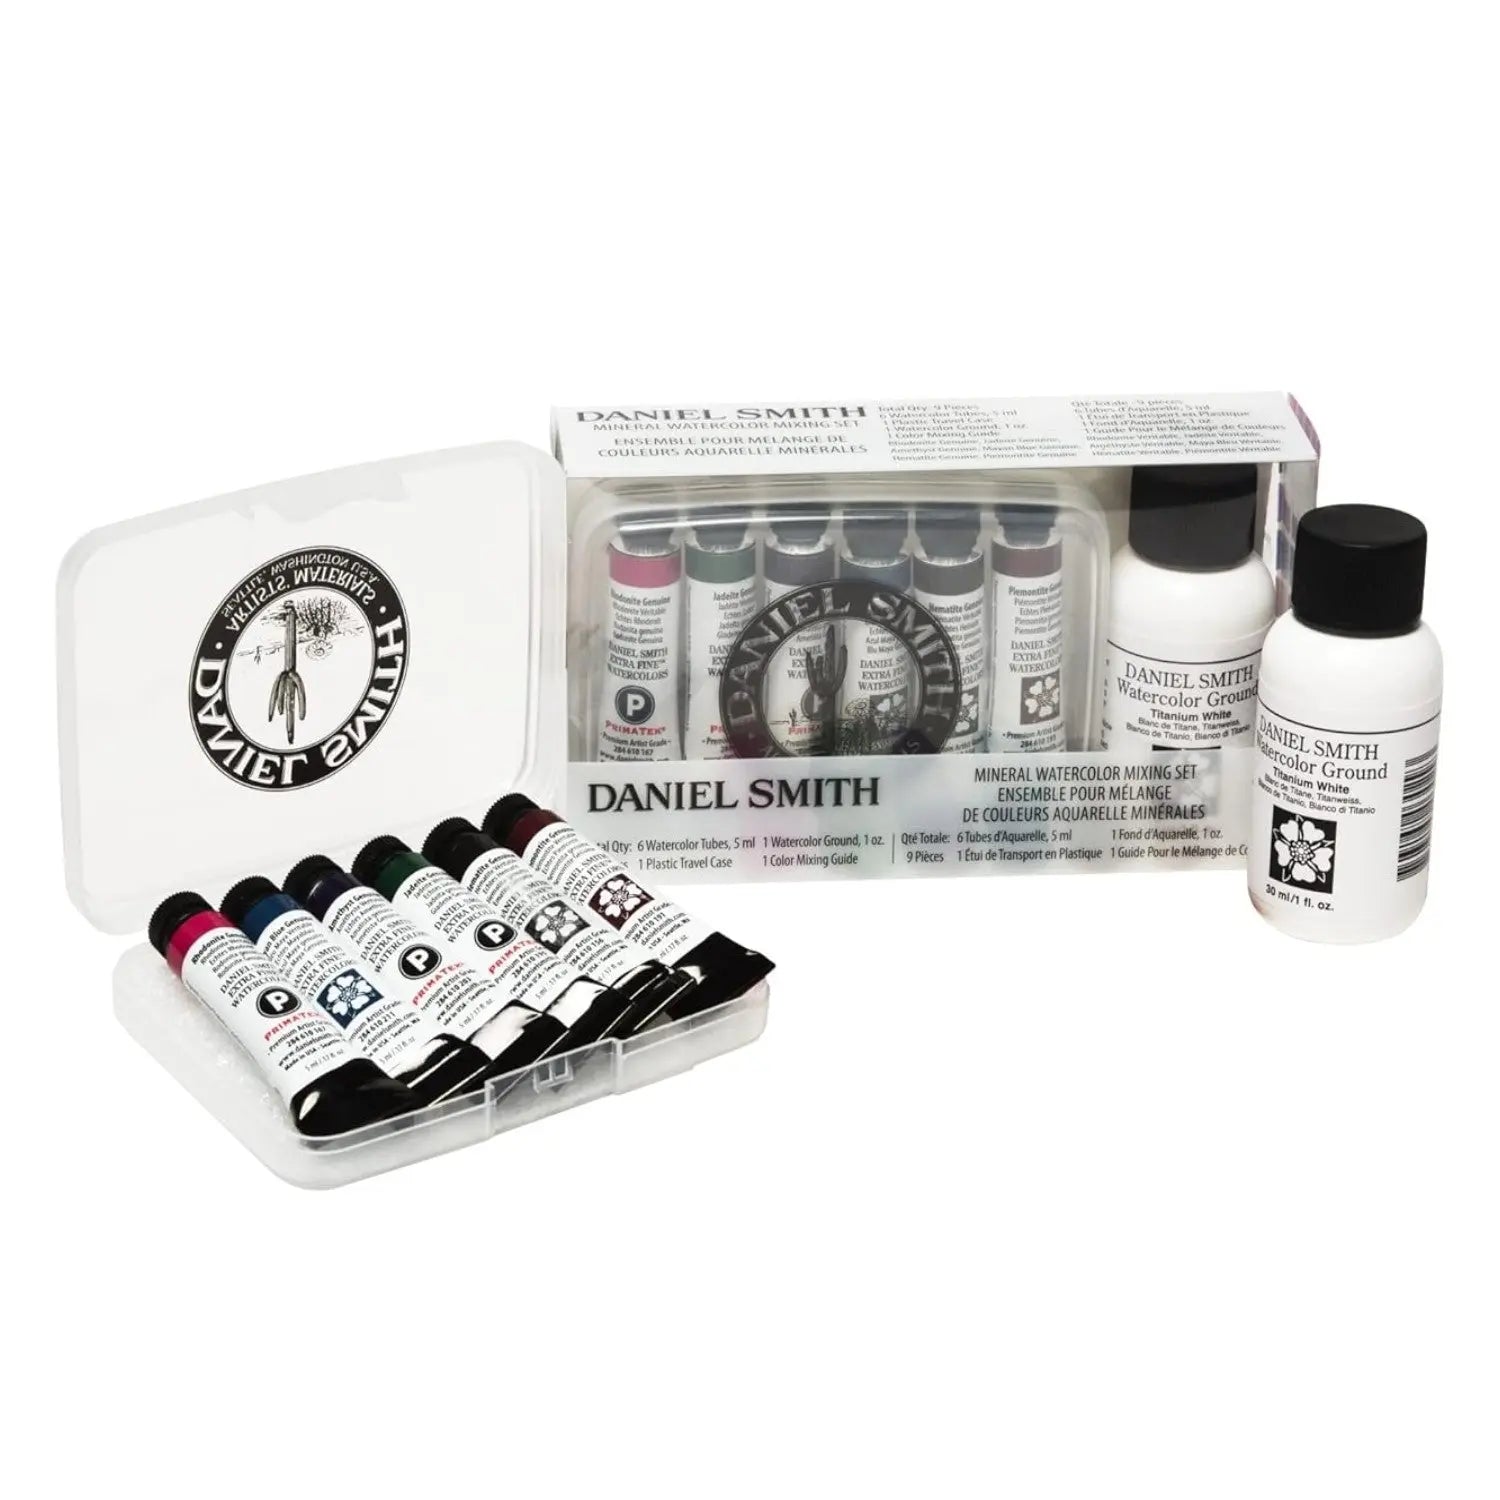 Daniel Smith Watercolor, Mineral Mixing Set with 5ml Primatek Colors, 1oz Watercolor Ground, Mixing Guide and Plastic Travel case Daniel Smith